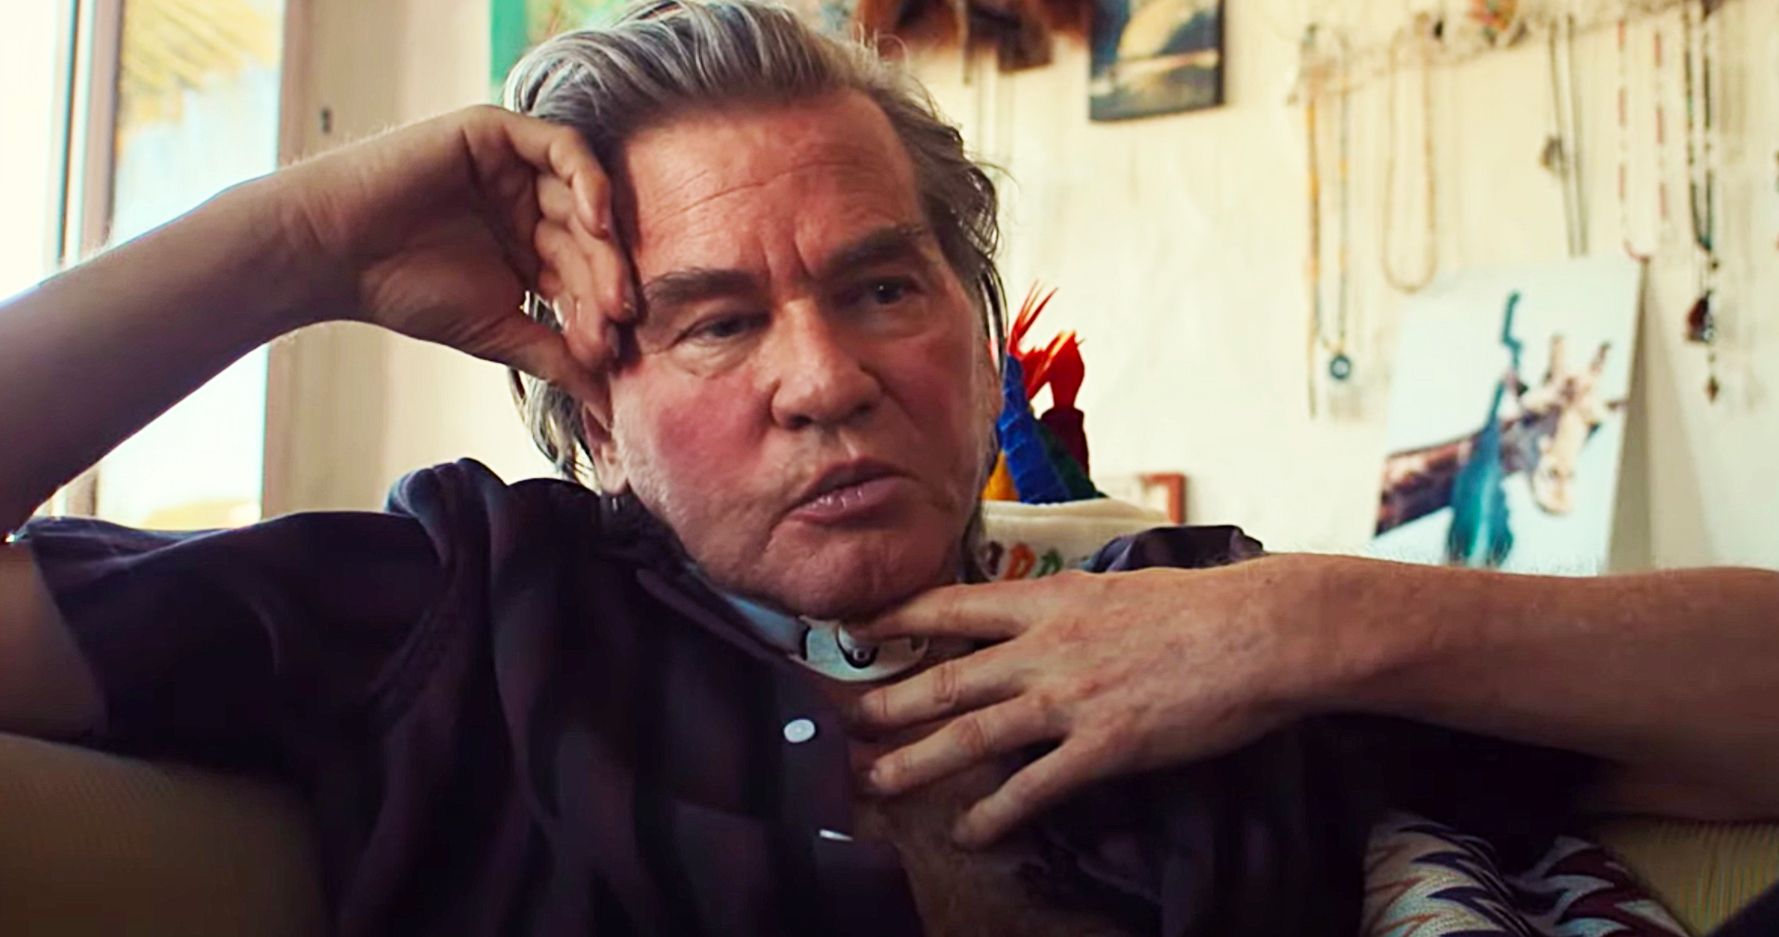 Val Kilmer Gets His Voice Back with AI Technology, Hear the Results